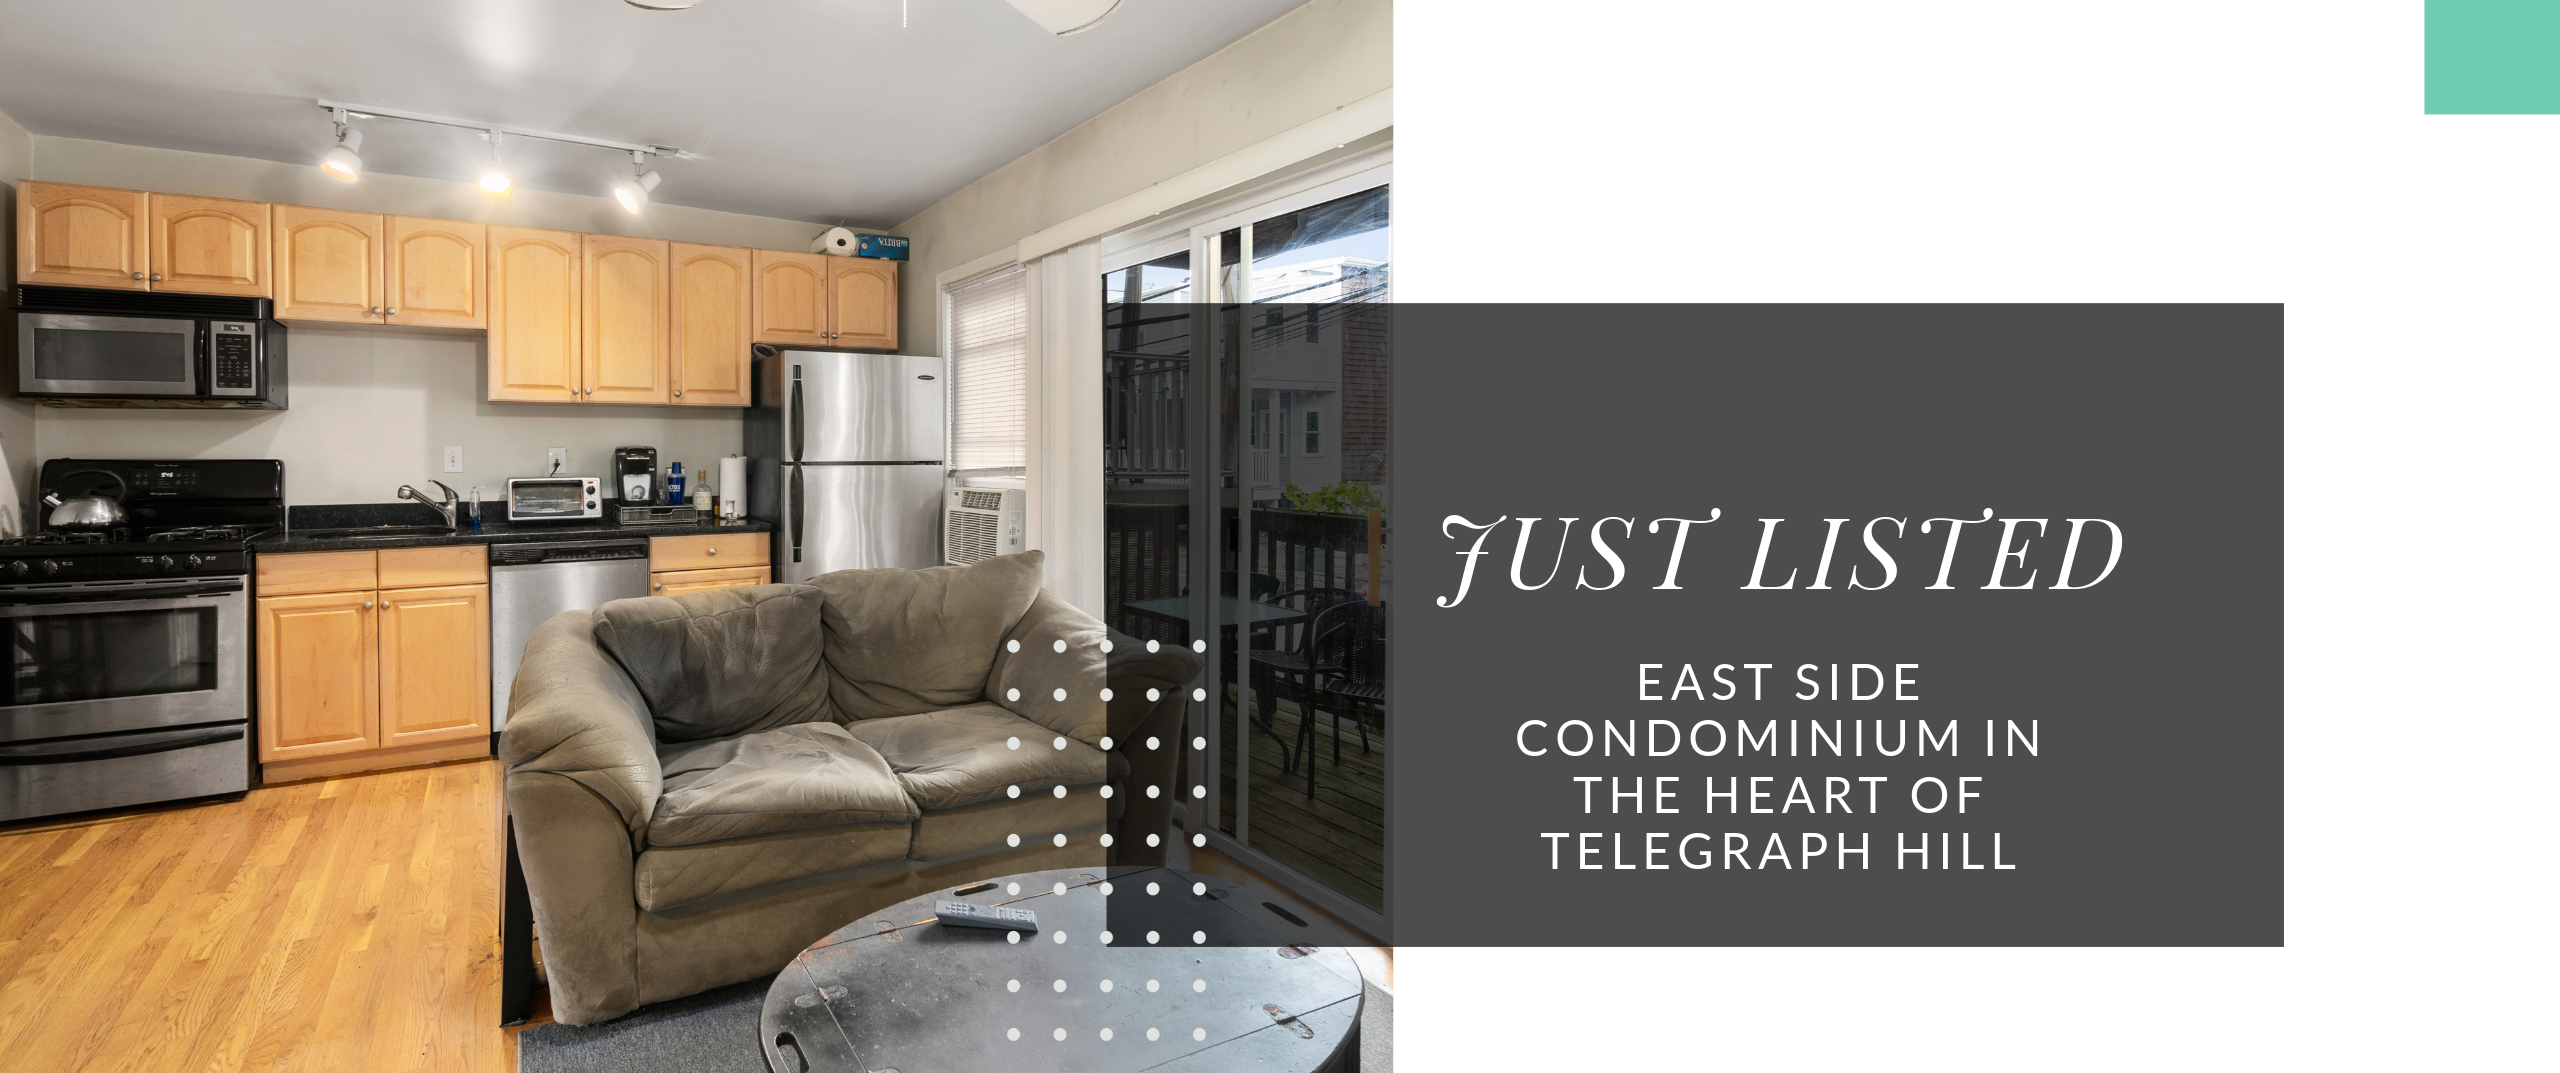 [Just Listed] East side condominium in the heart of Telegraph Hill